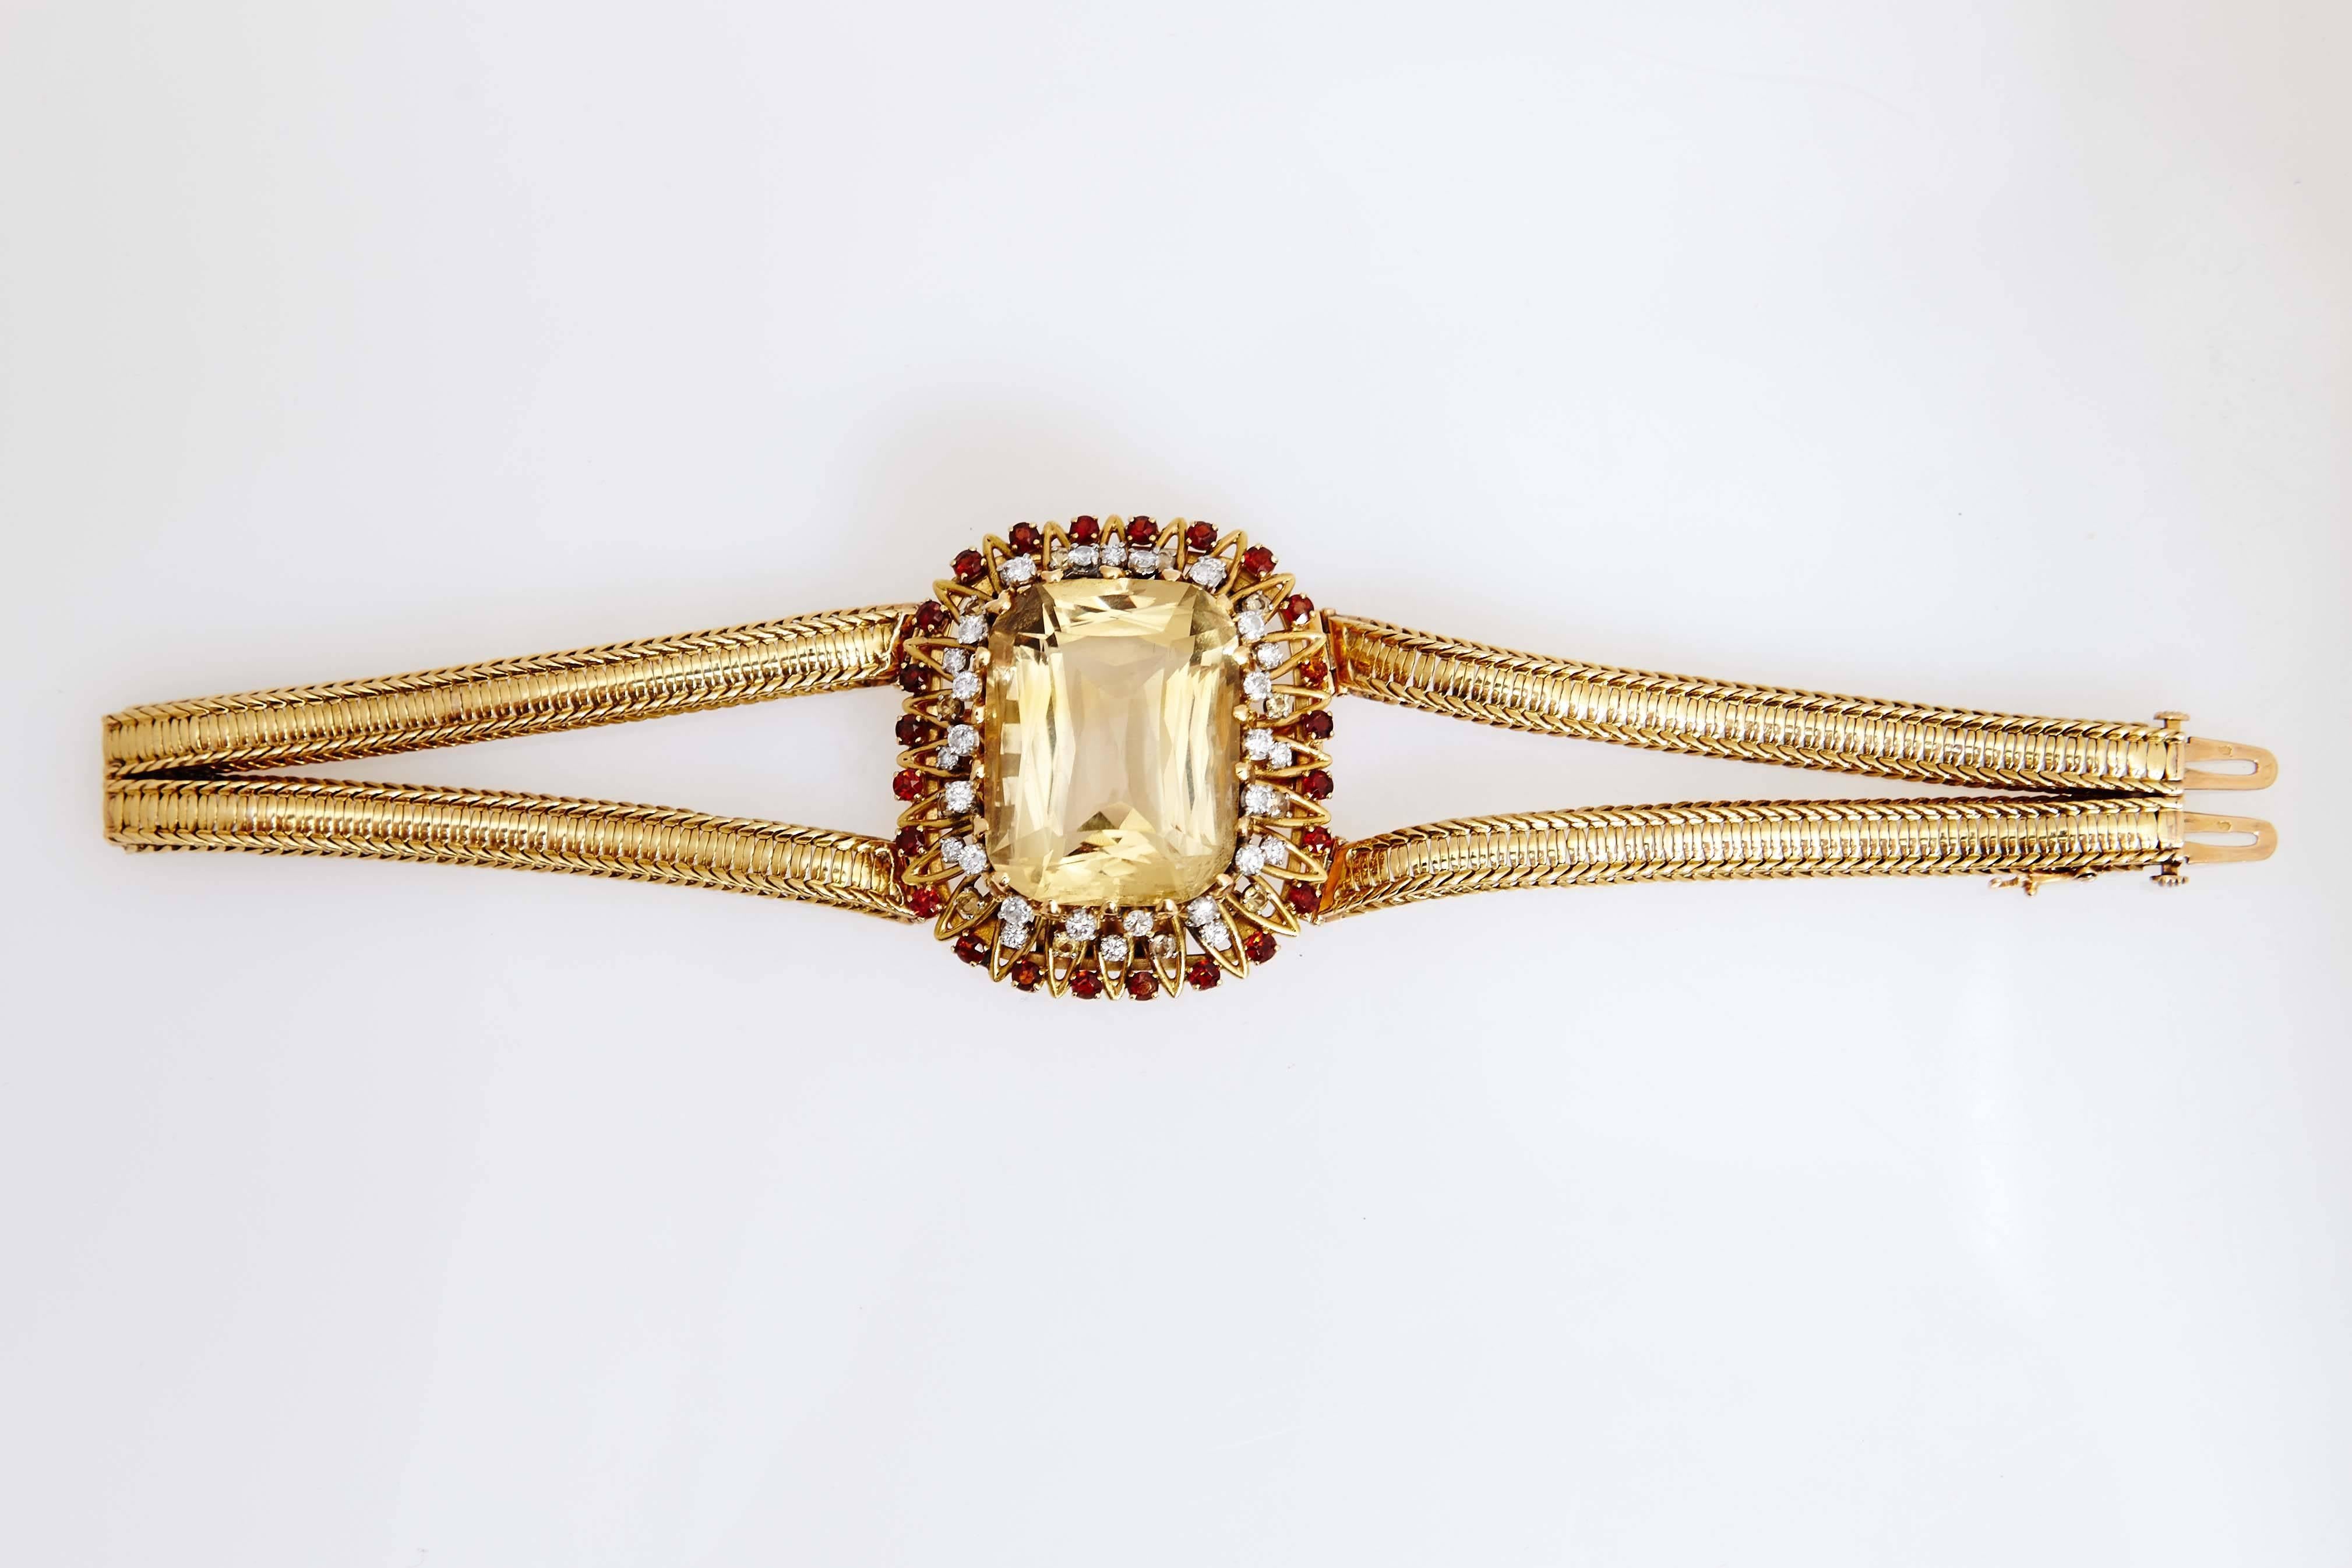 An exquisite retro gold bracelet by Pierre Sterle, showcasing a large citrine, highlighted with diamonds and garnets. Made in Paris, circa 1950. 